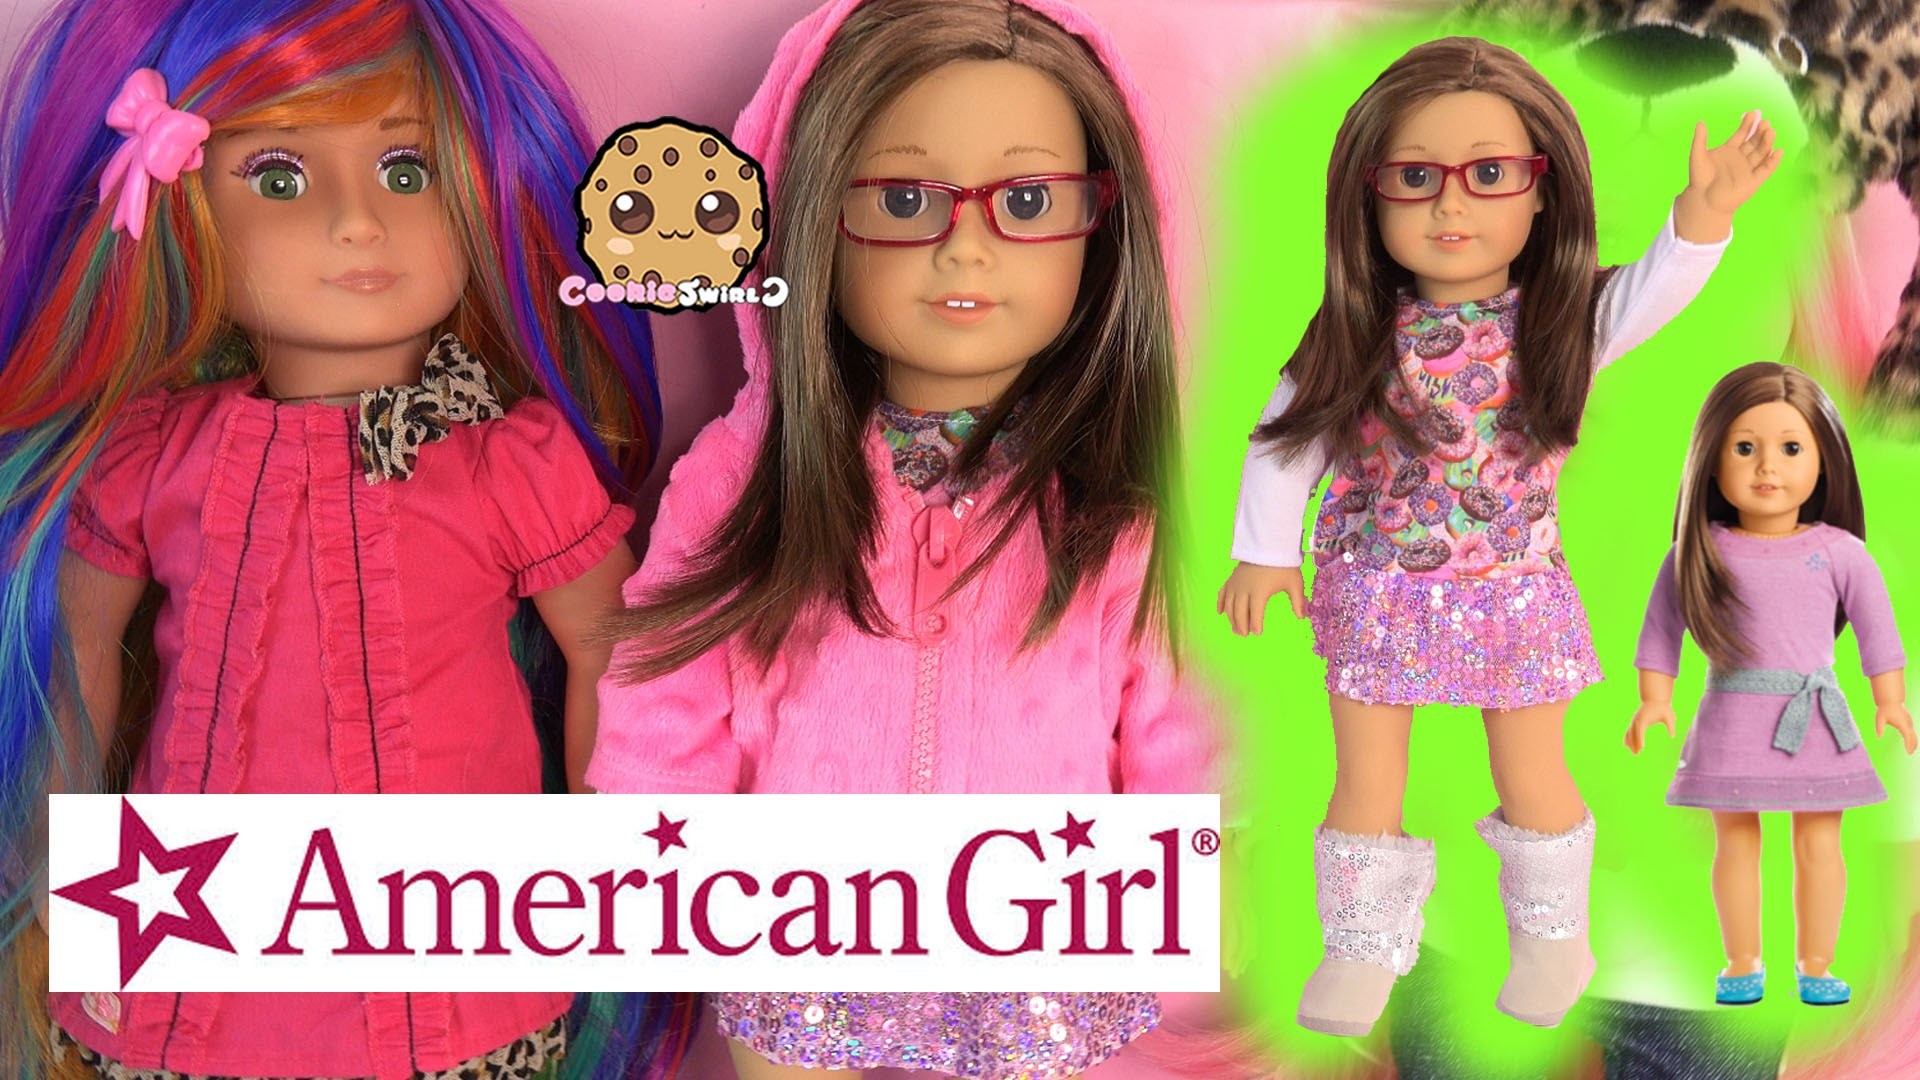 1920x1080 American Girl Truly Me Collection Doll + Fashion + Custom 18 Inch Dolls -  Cookieswirlc Toy Video - YouTube